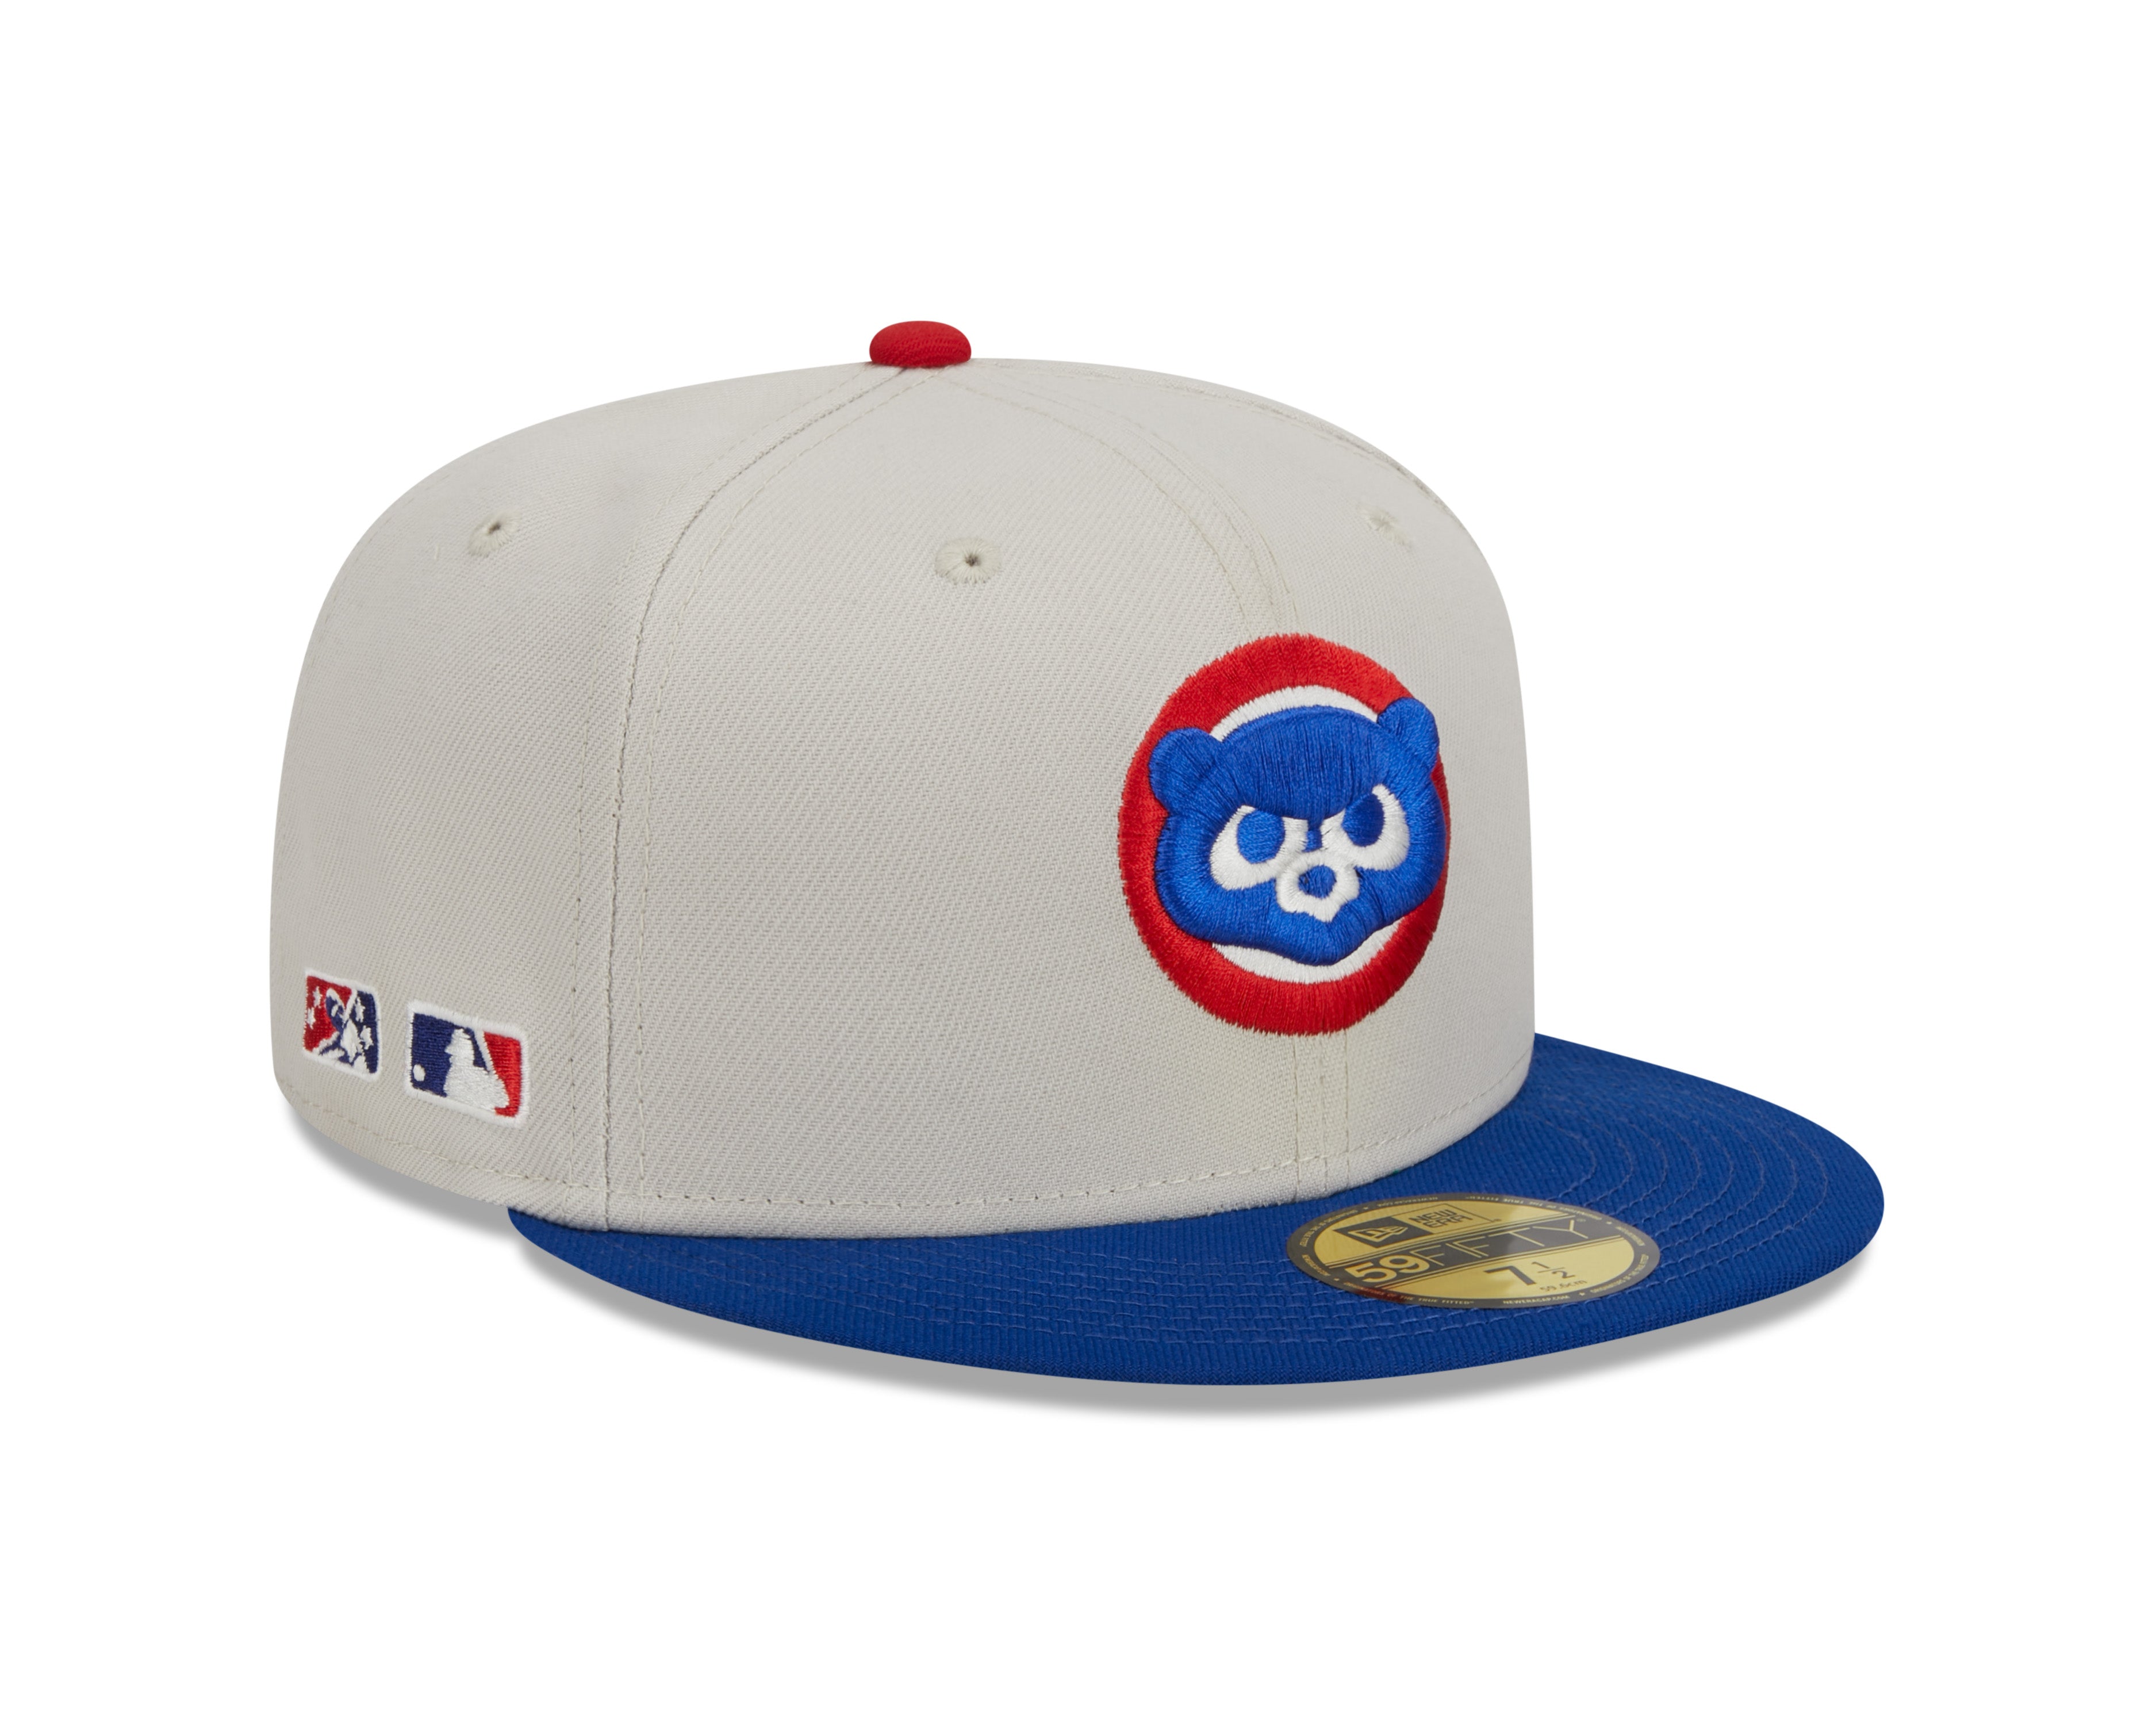 New Era - Chicago Cubs - 59Fifty Fitted - FARM TEAM - Stone - Headz Up 